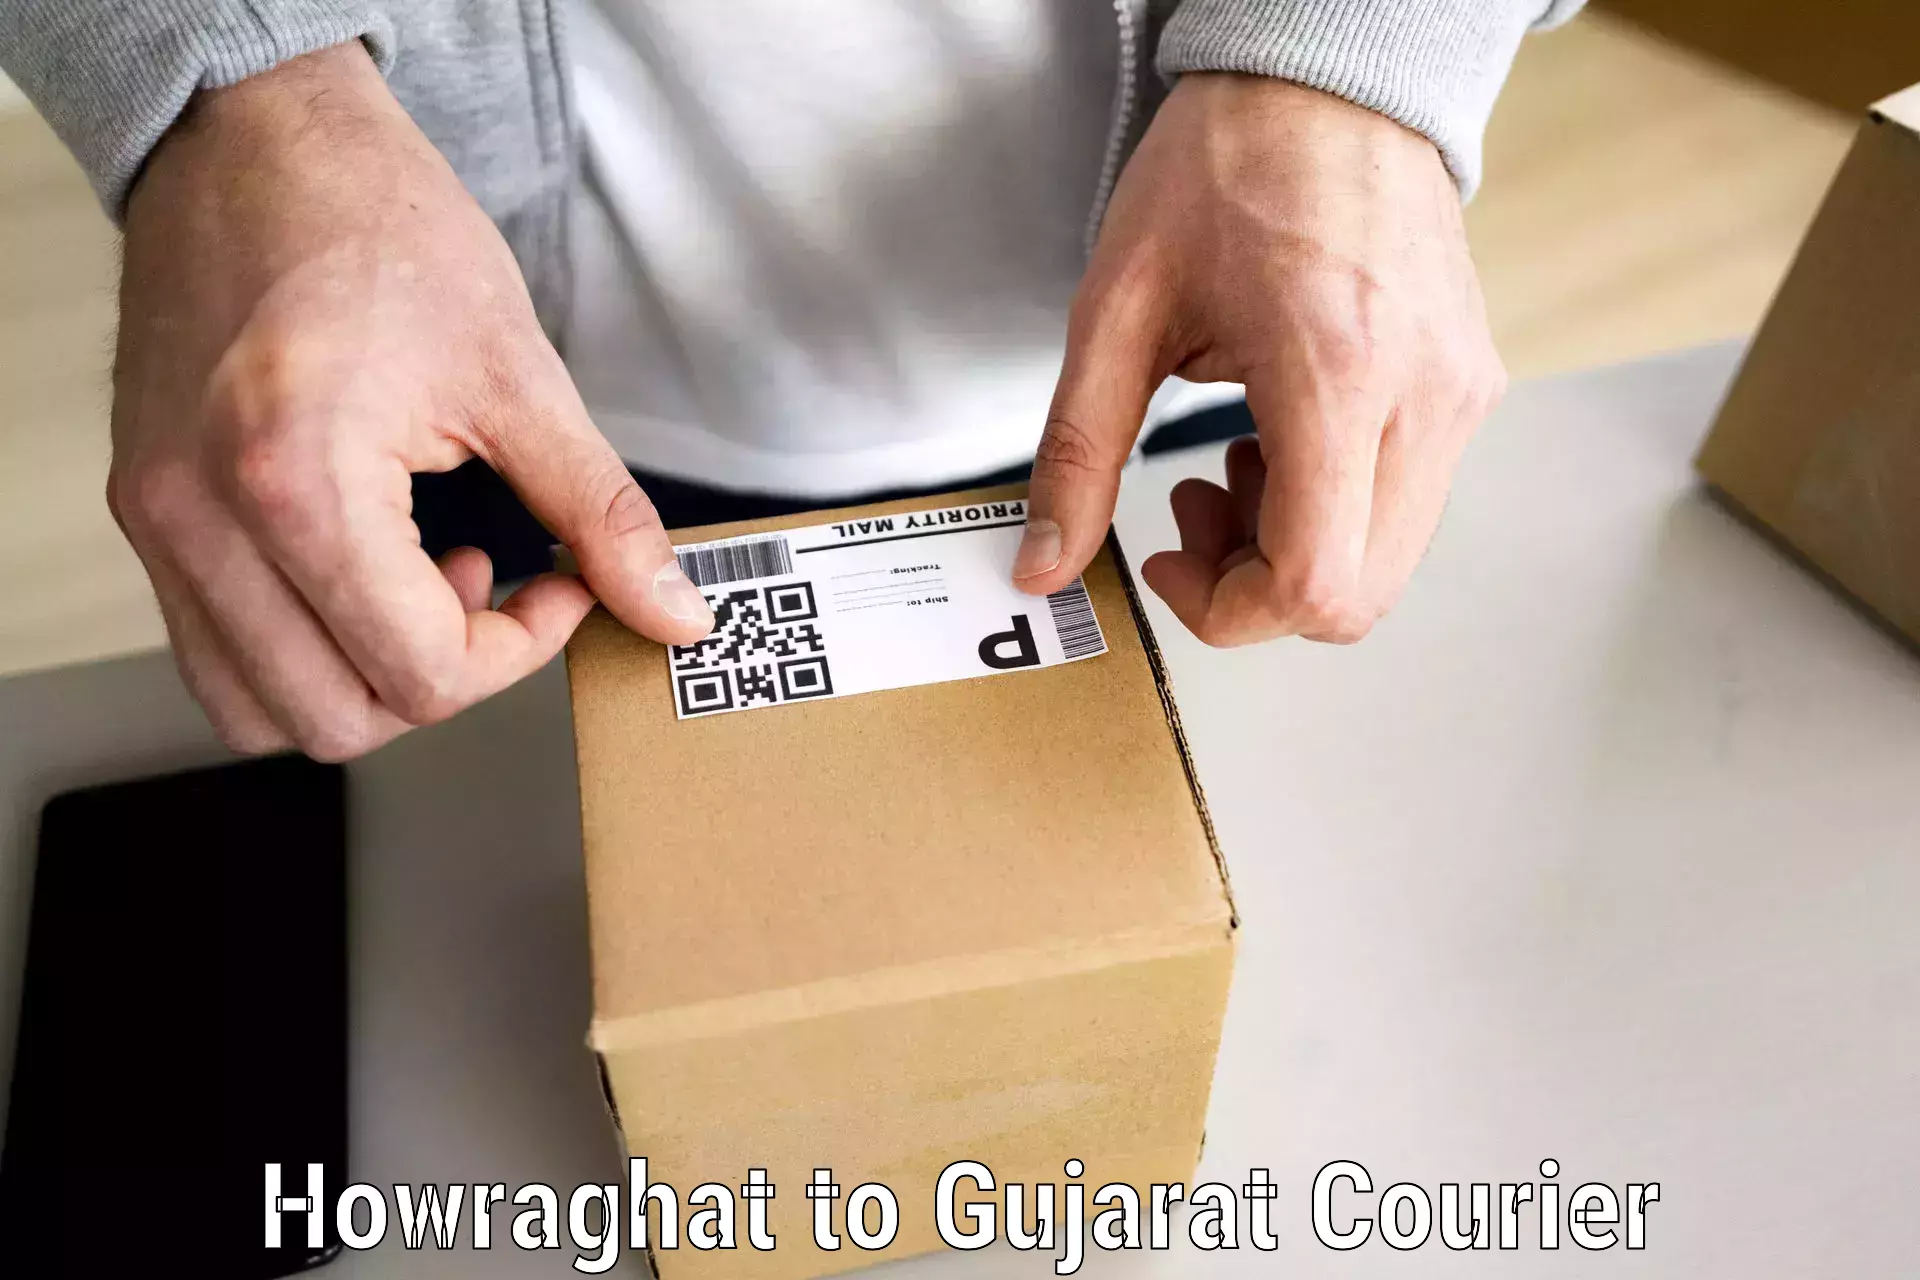 Quality moving and storage Howraghat to Narmada Gujarat